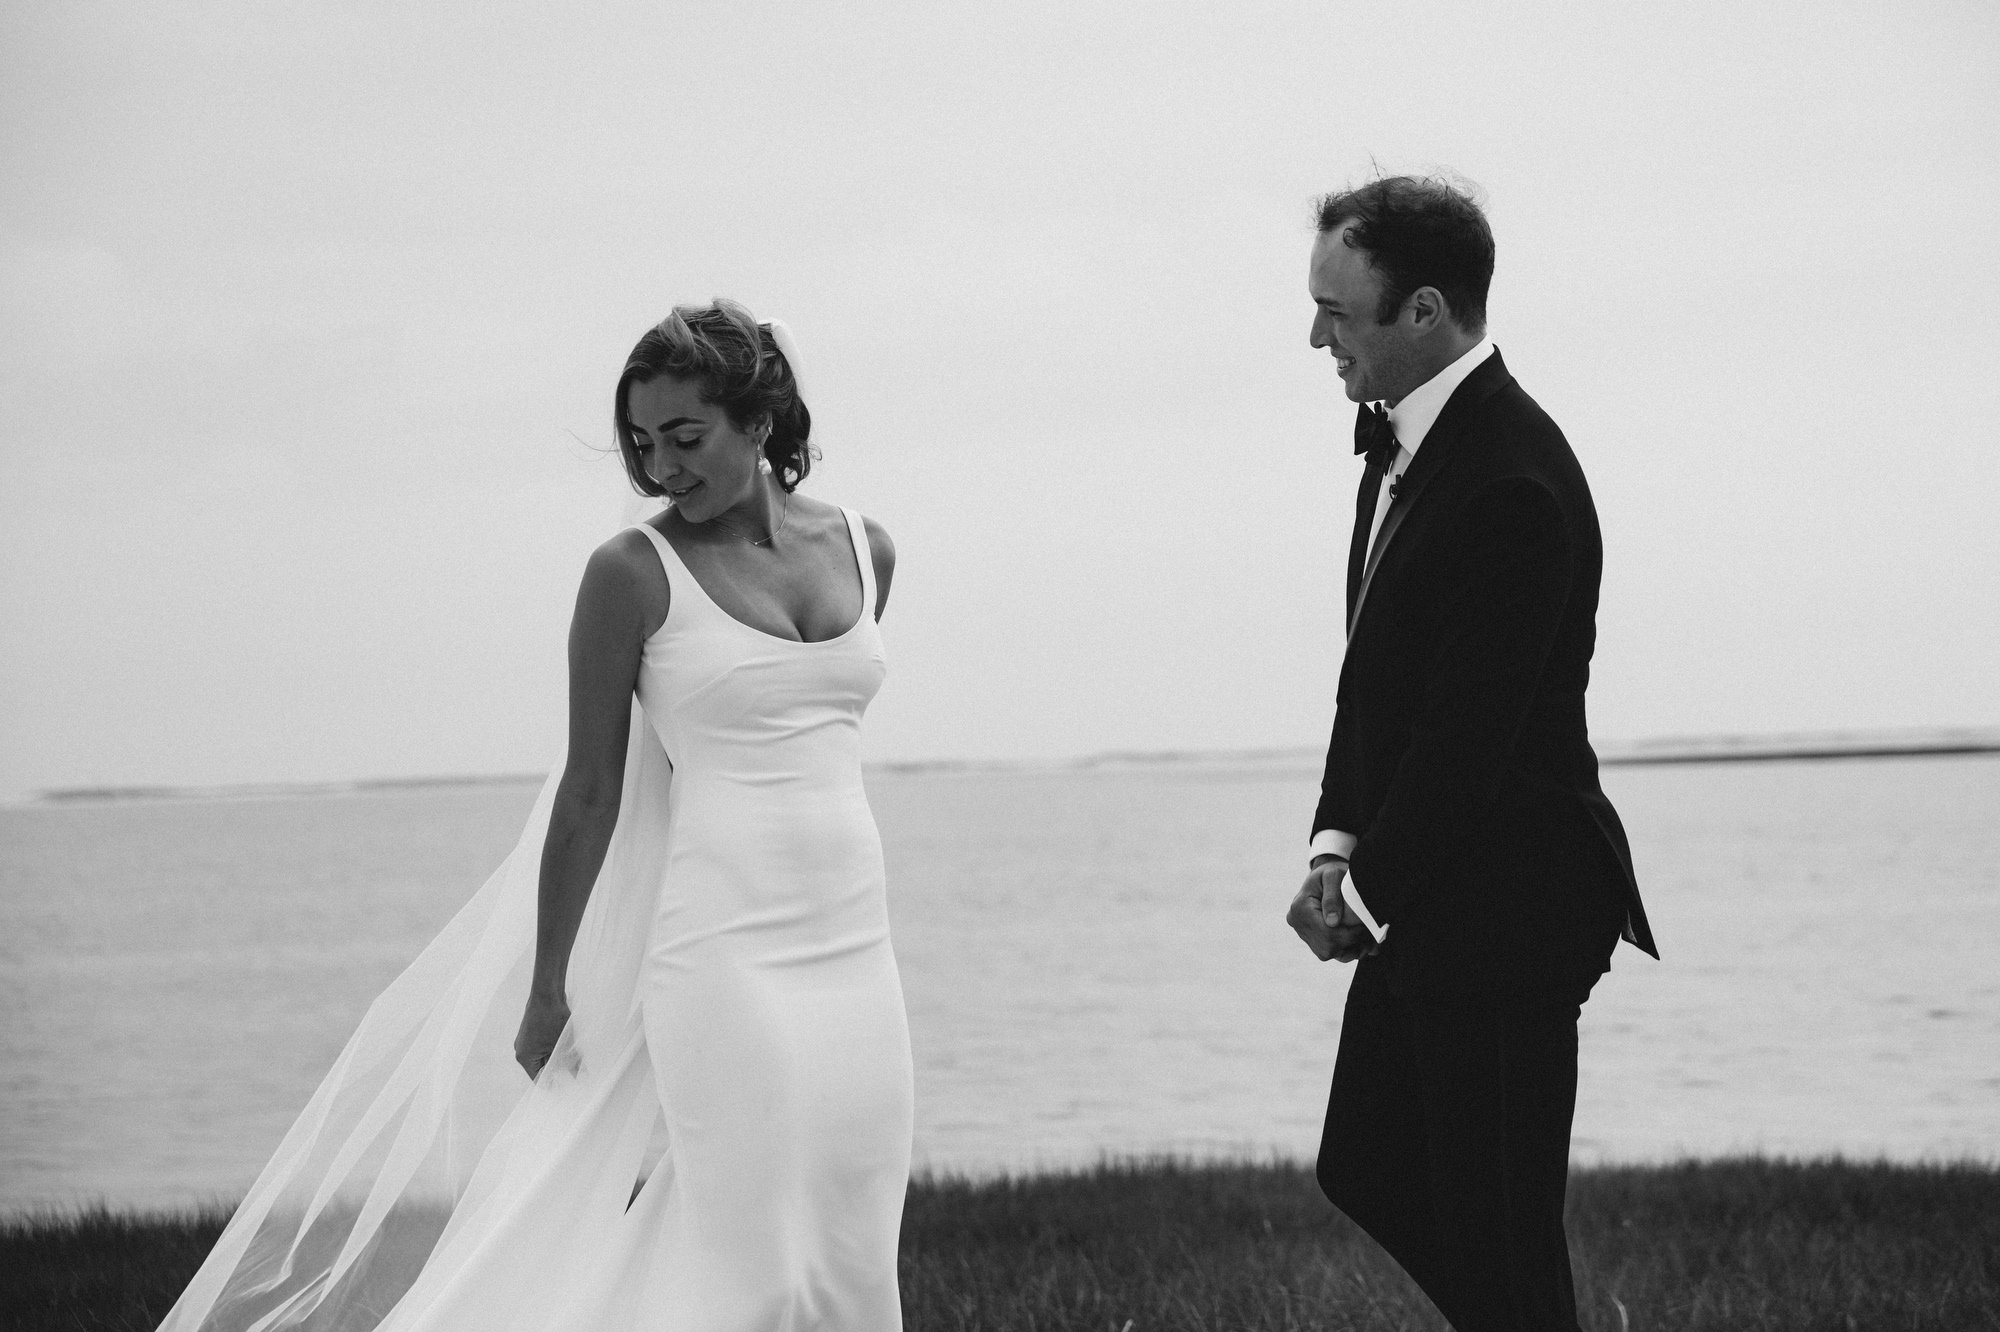 stylish editorial style wedding in chatham near the water at a private wedidng estate similar to chatham bars inn